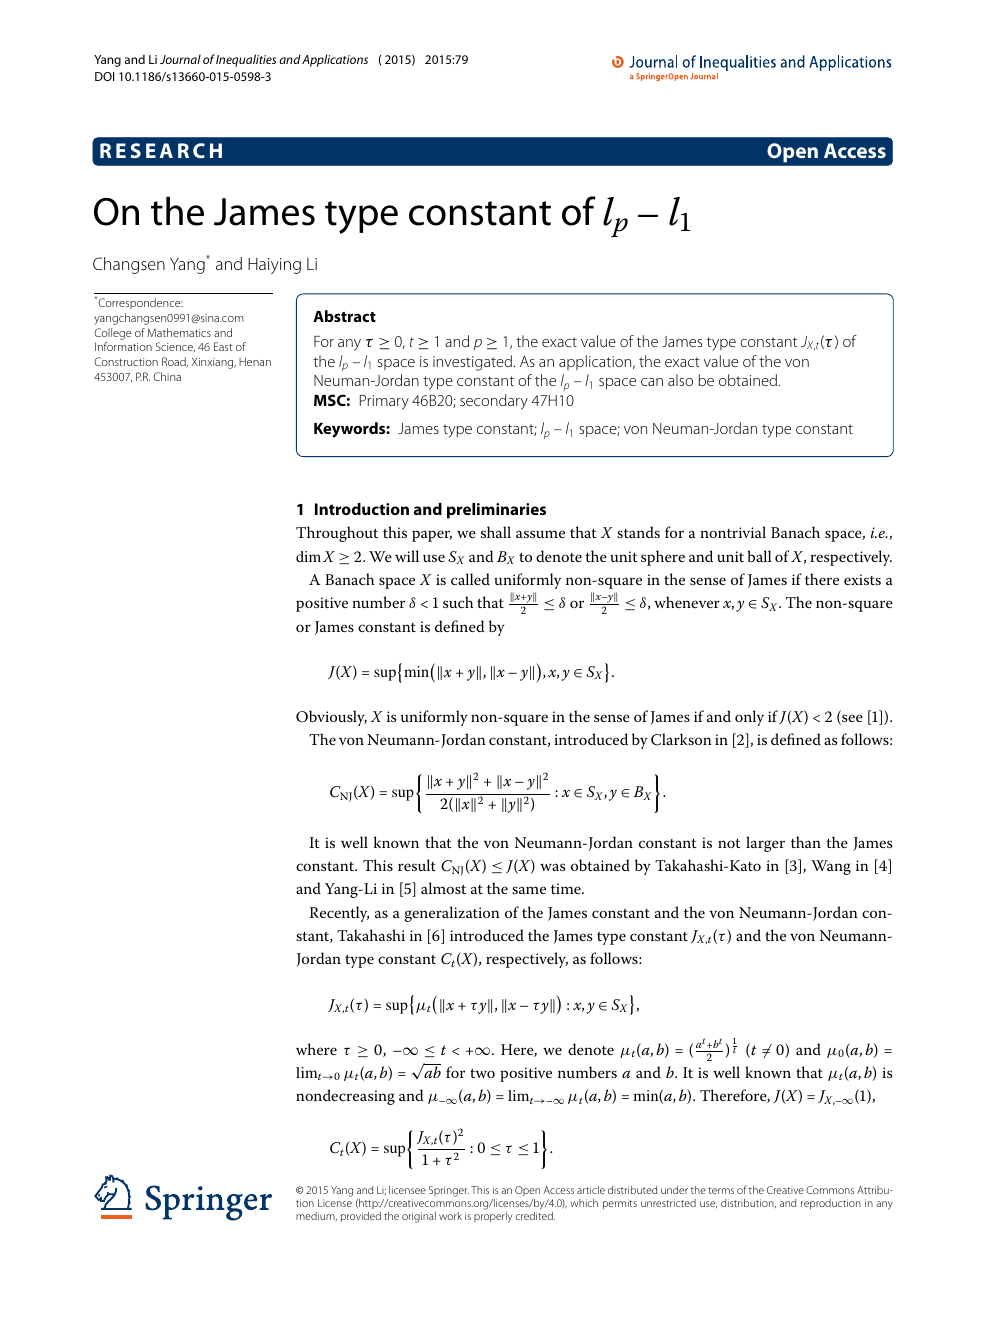 On The James Type Constant Of Lp L1 Topic Of Research Paper In Mathematics Download Scholarly Article Pdf And Read For Free On Cyberleninka Open Science Hub